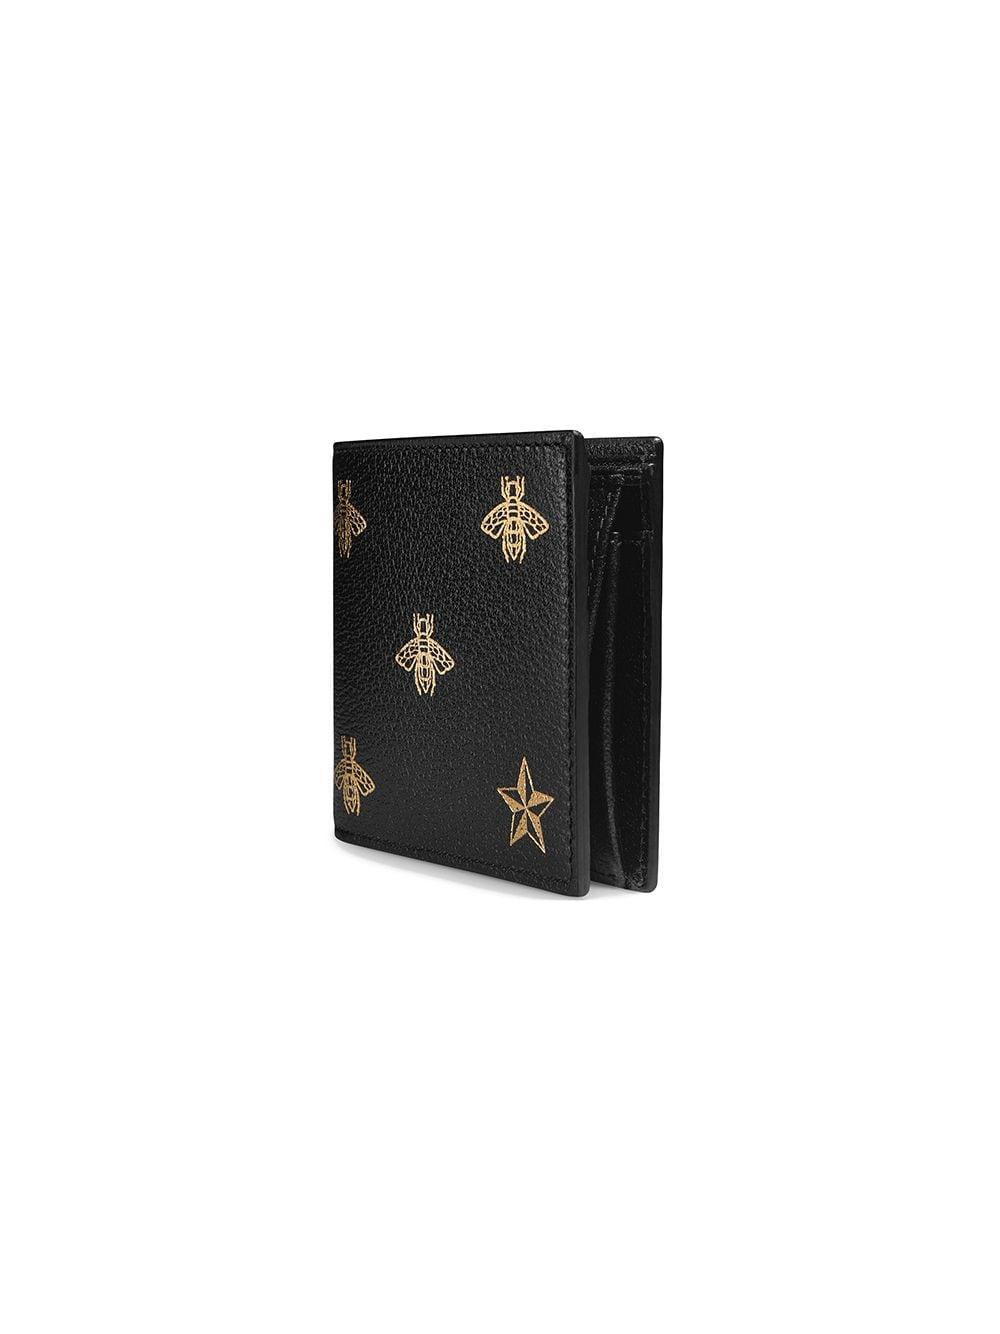 Gucci Bee Star Leather Coin Wallet in Black for Men | Lyst